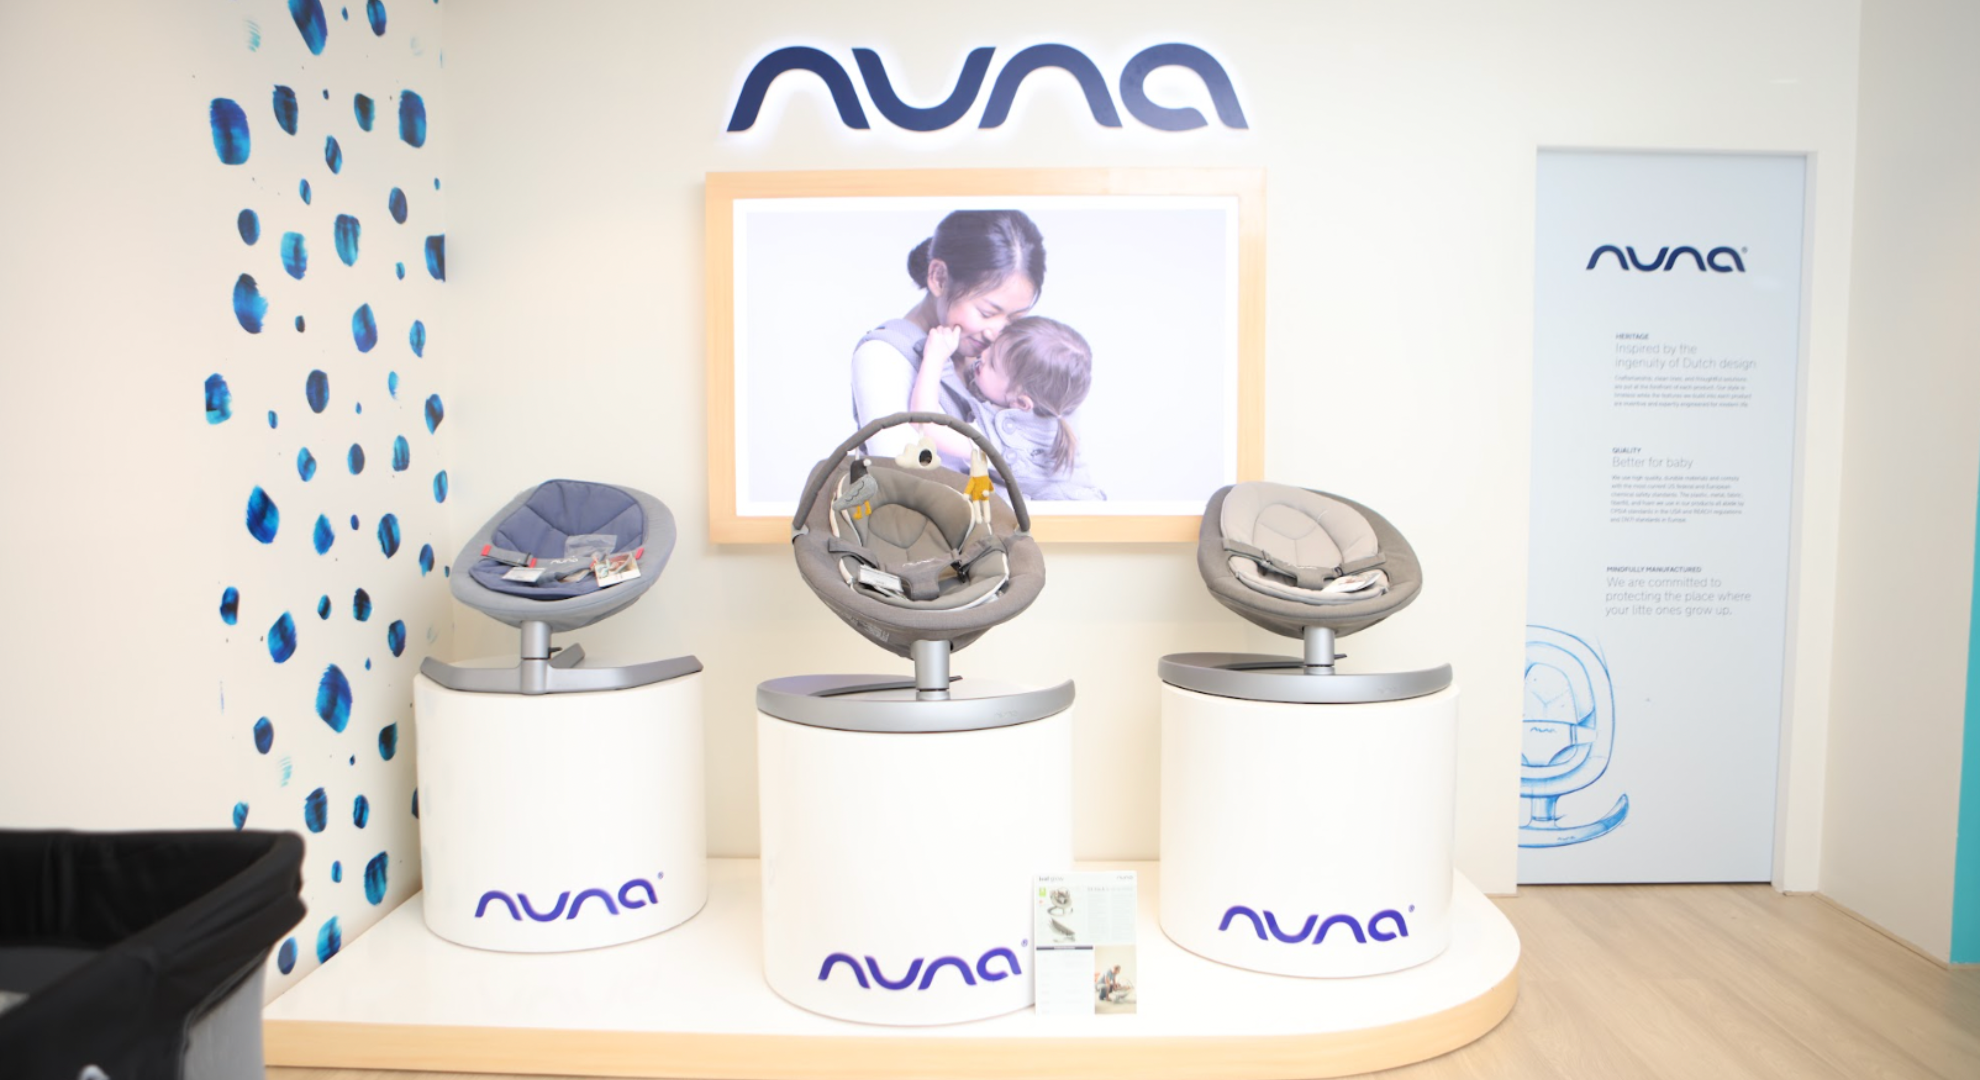 Nuna announces the opening of its first Nuna store in Philippines